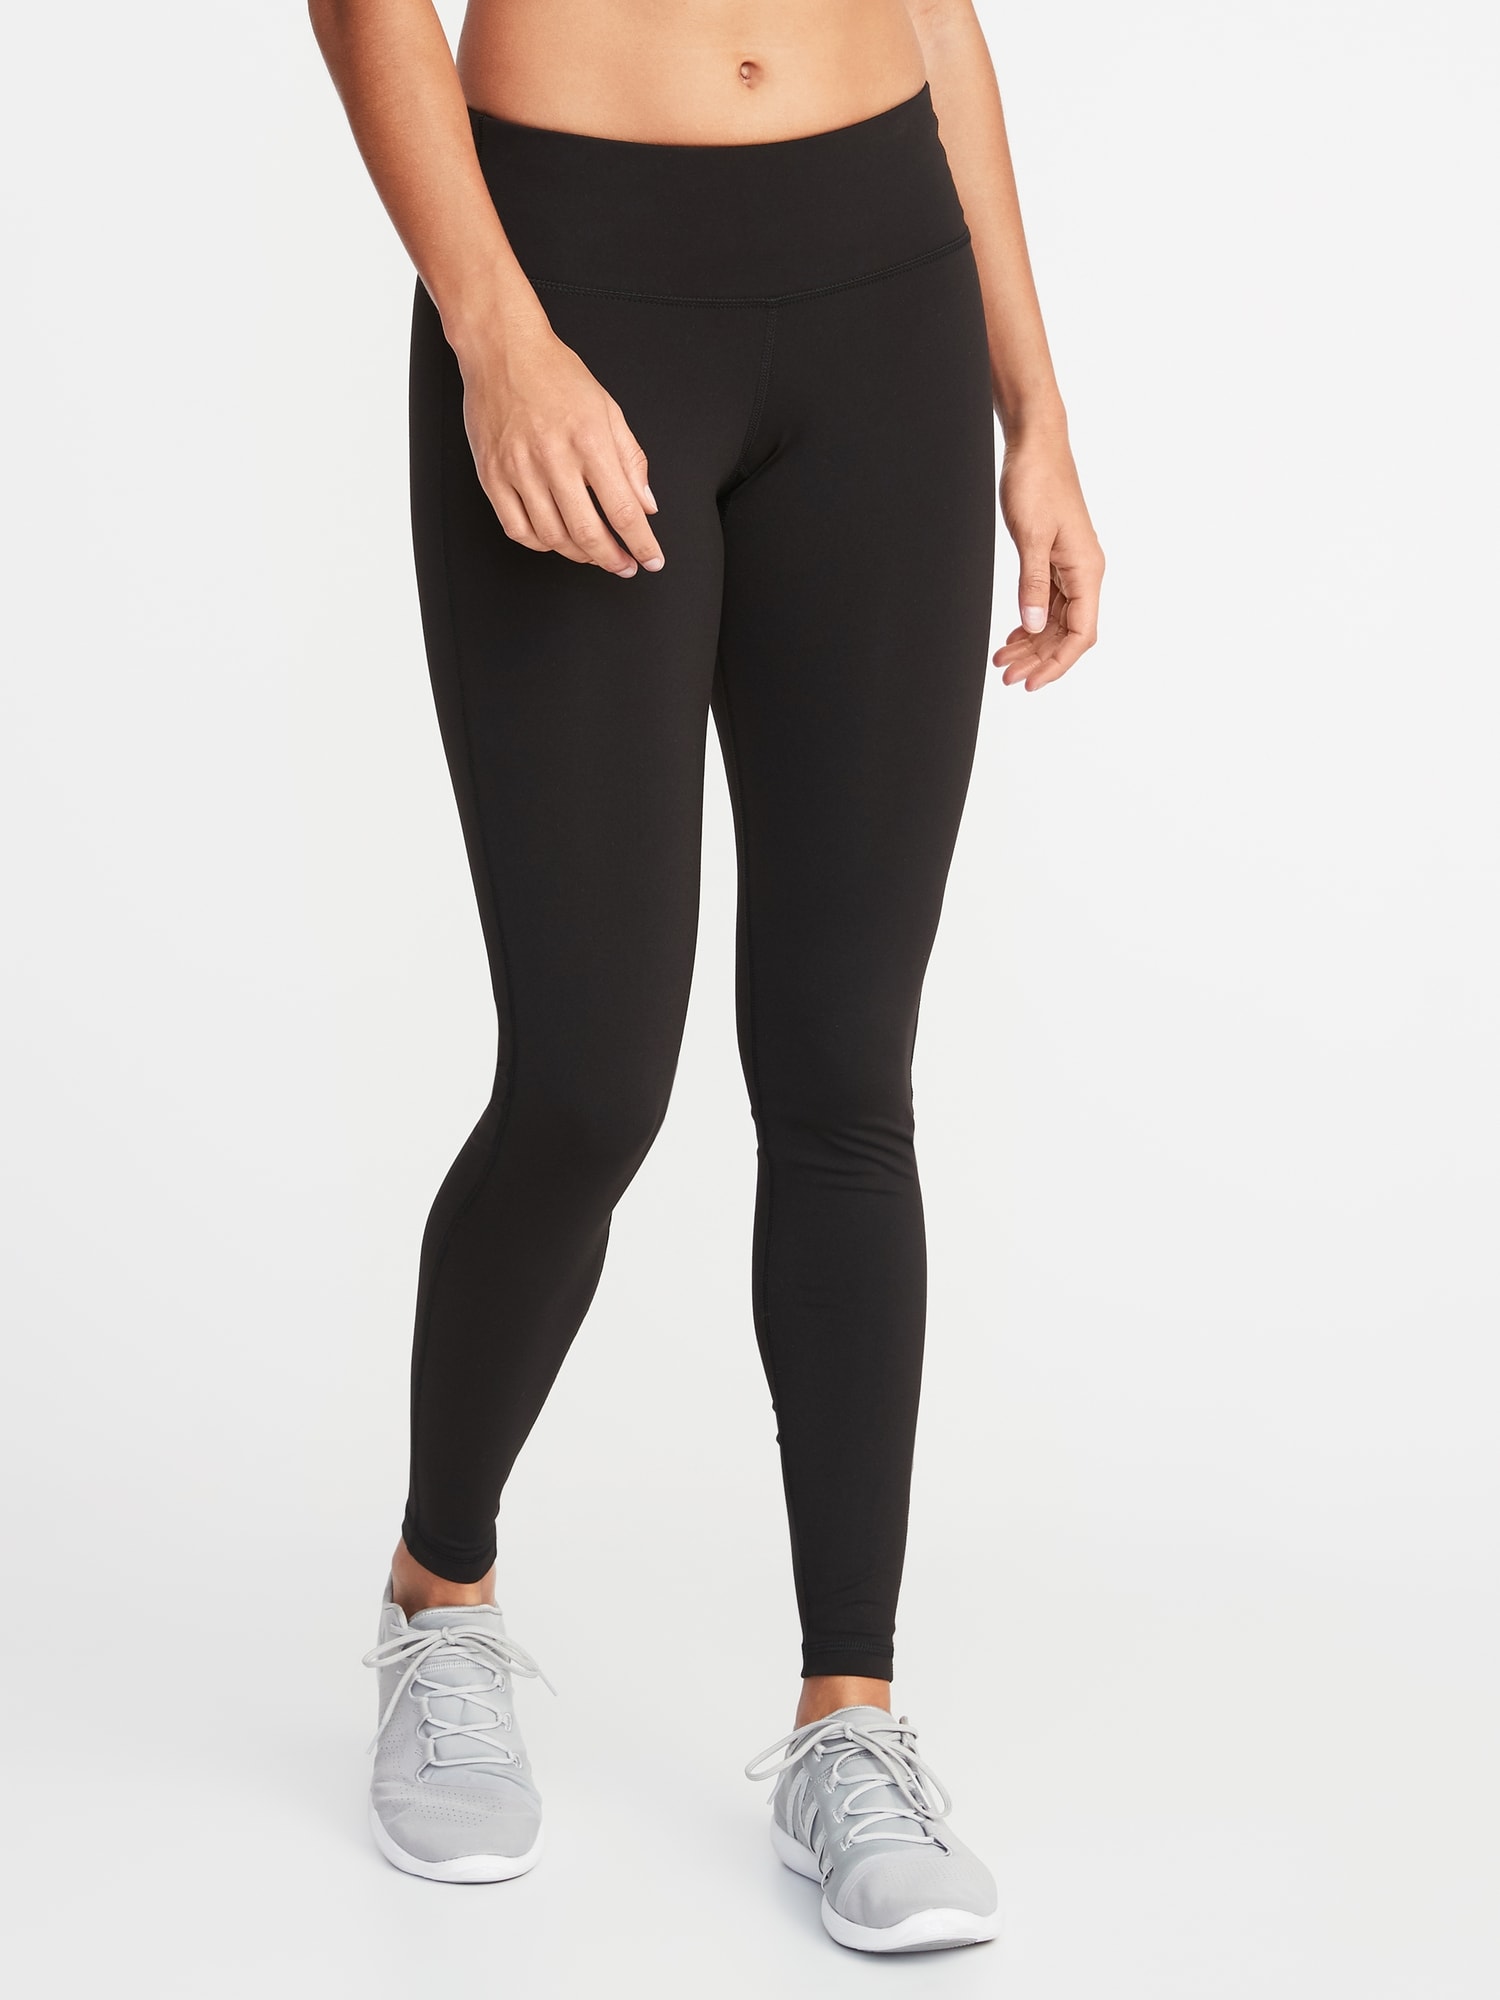 low rise workout tights